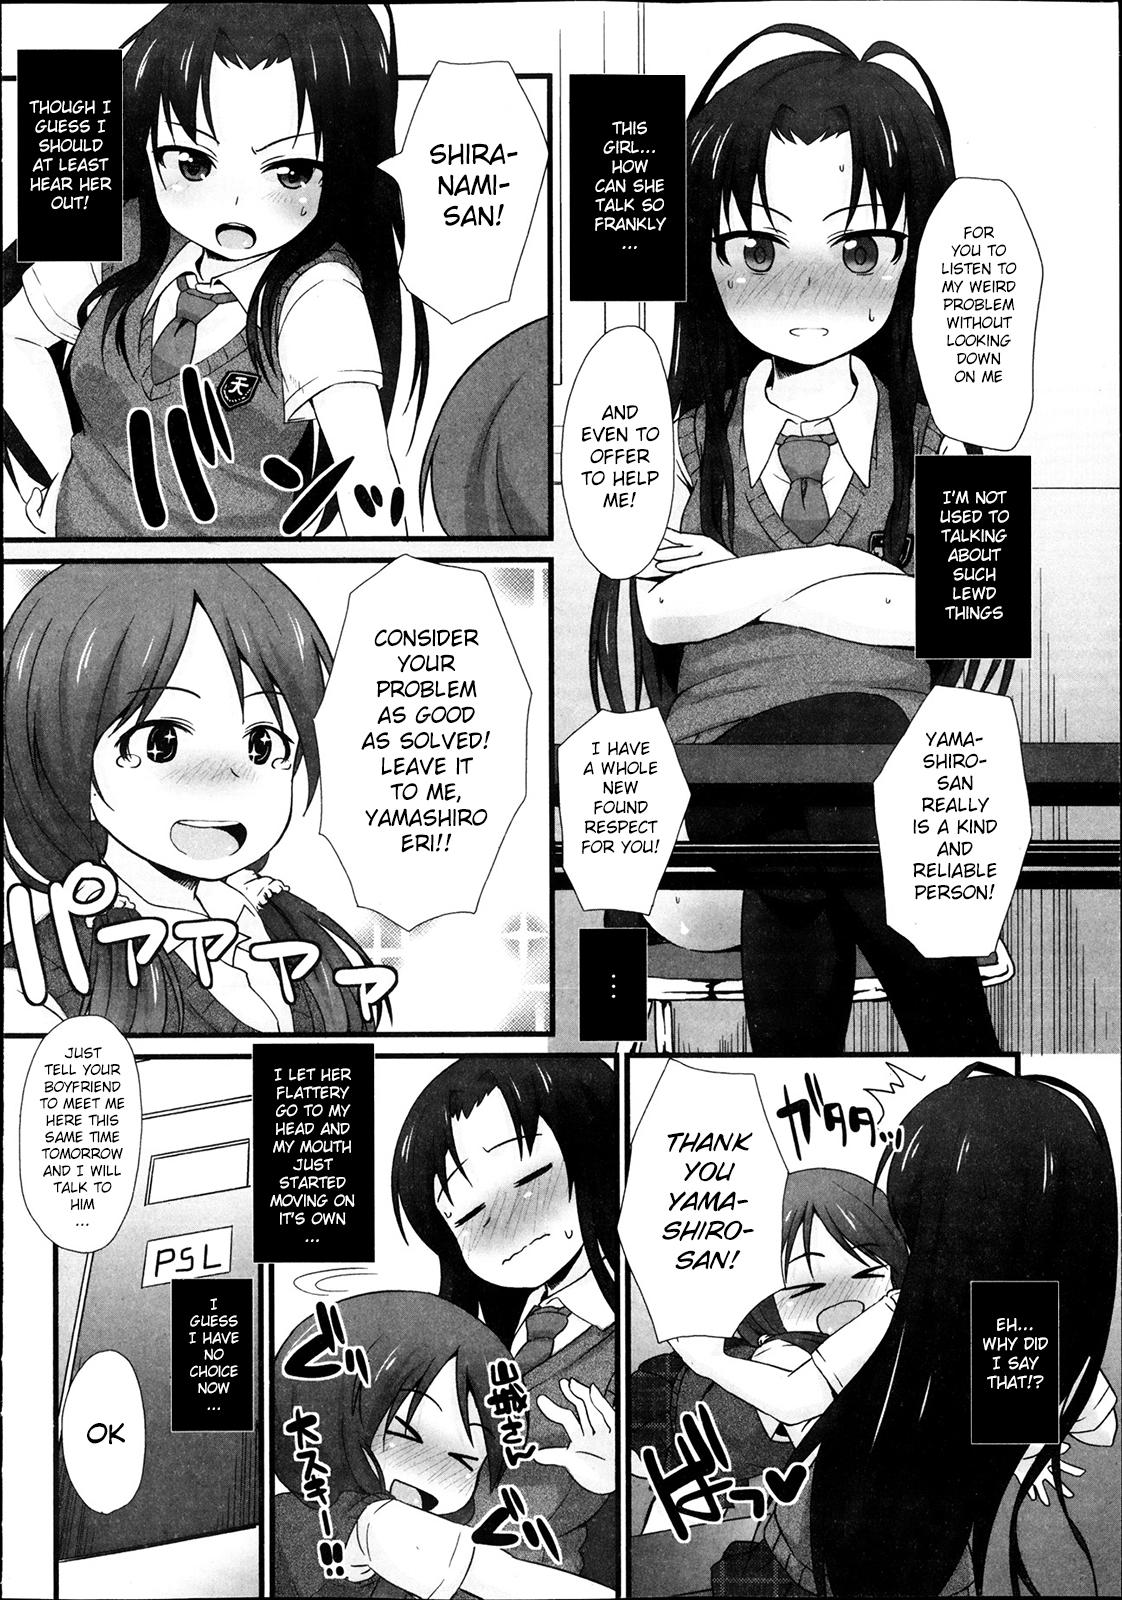 Free Rough Porn PSL-bu e Youkoso | Welcome to the PSL Club All Natural - Page 4